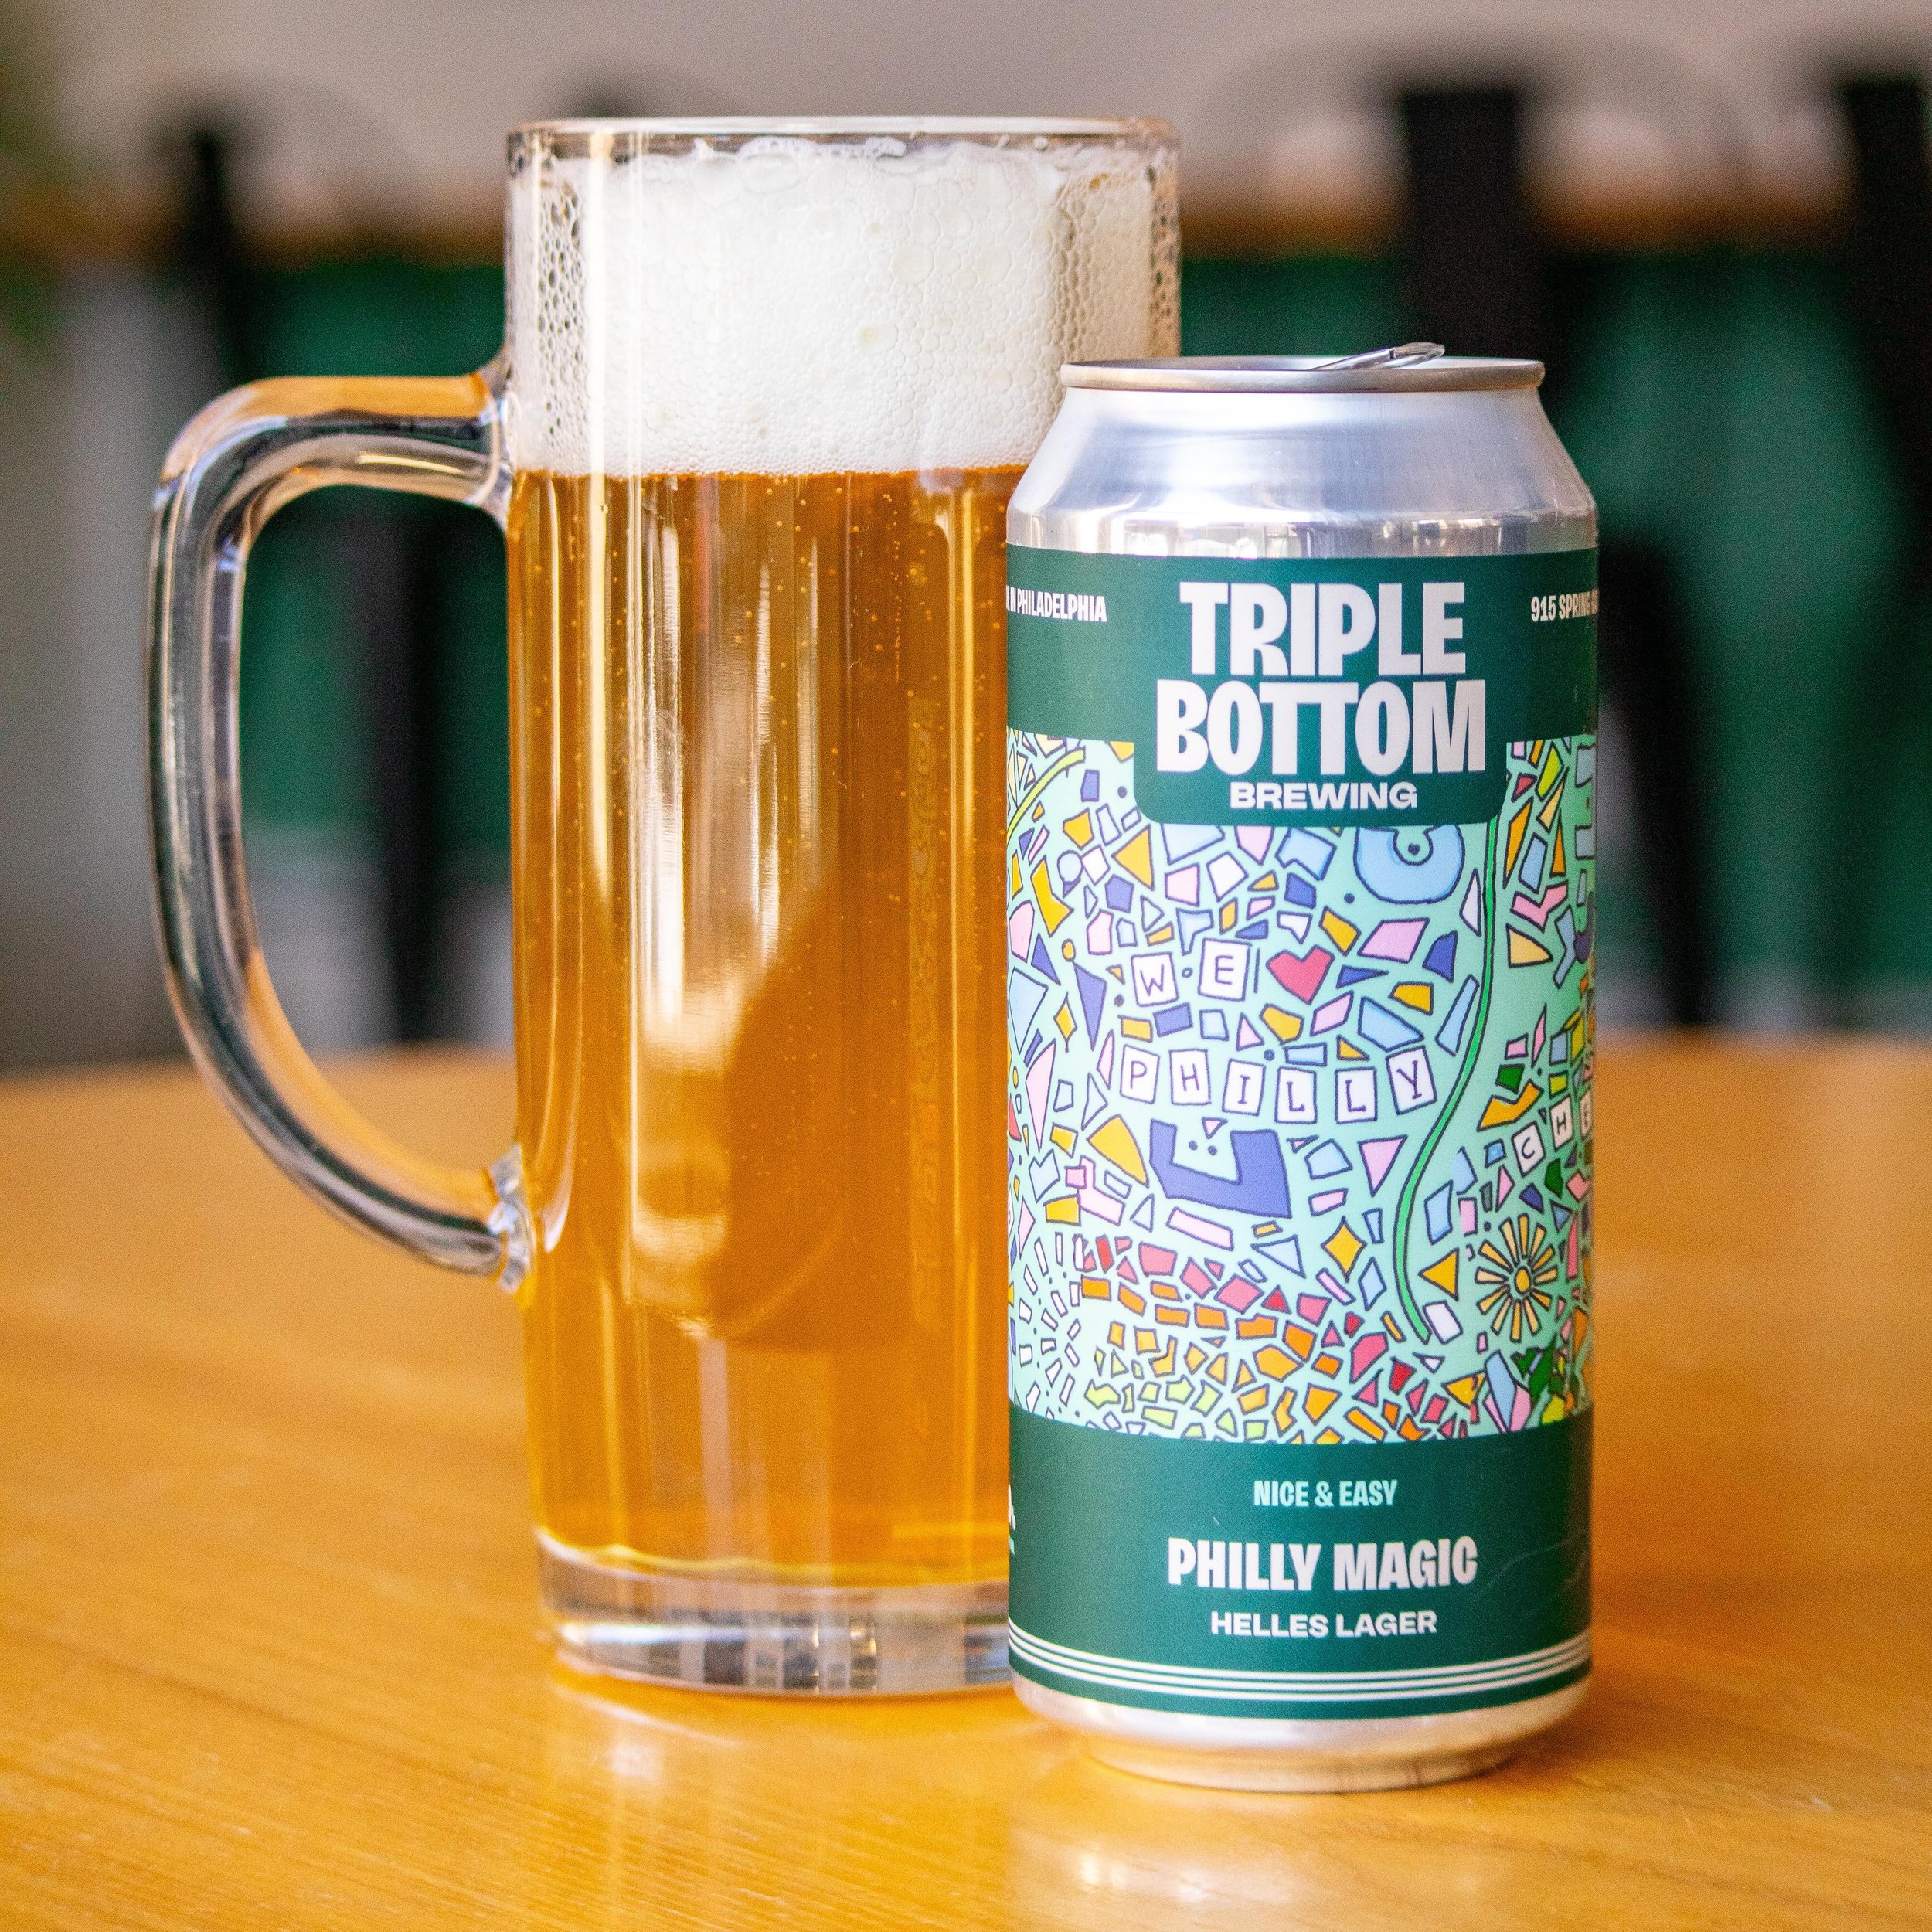 ✨Philly Magic✨ is back! Inspired by Philly&rsquo;s own Magic Gardens, this Helles Lager is crisp and clean with a light bitterness and a gentle notes of biscuits. It&rsquo;s so perfect for these warm Spring days we&rsquo;re having. Swing by the tapro